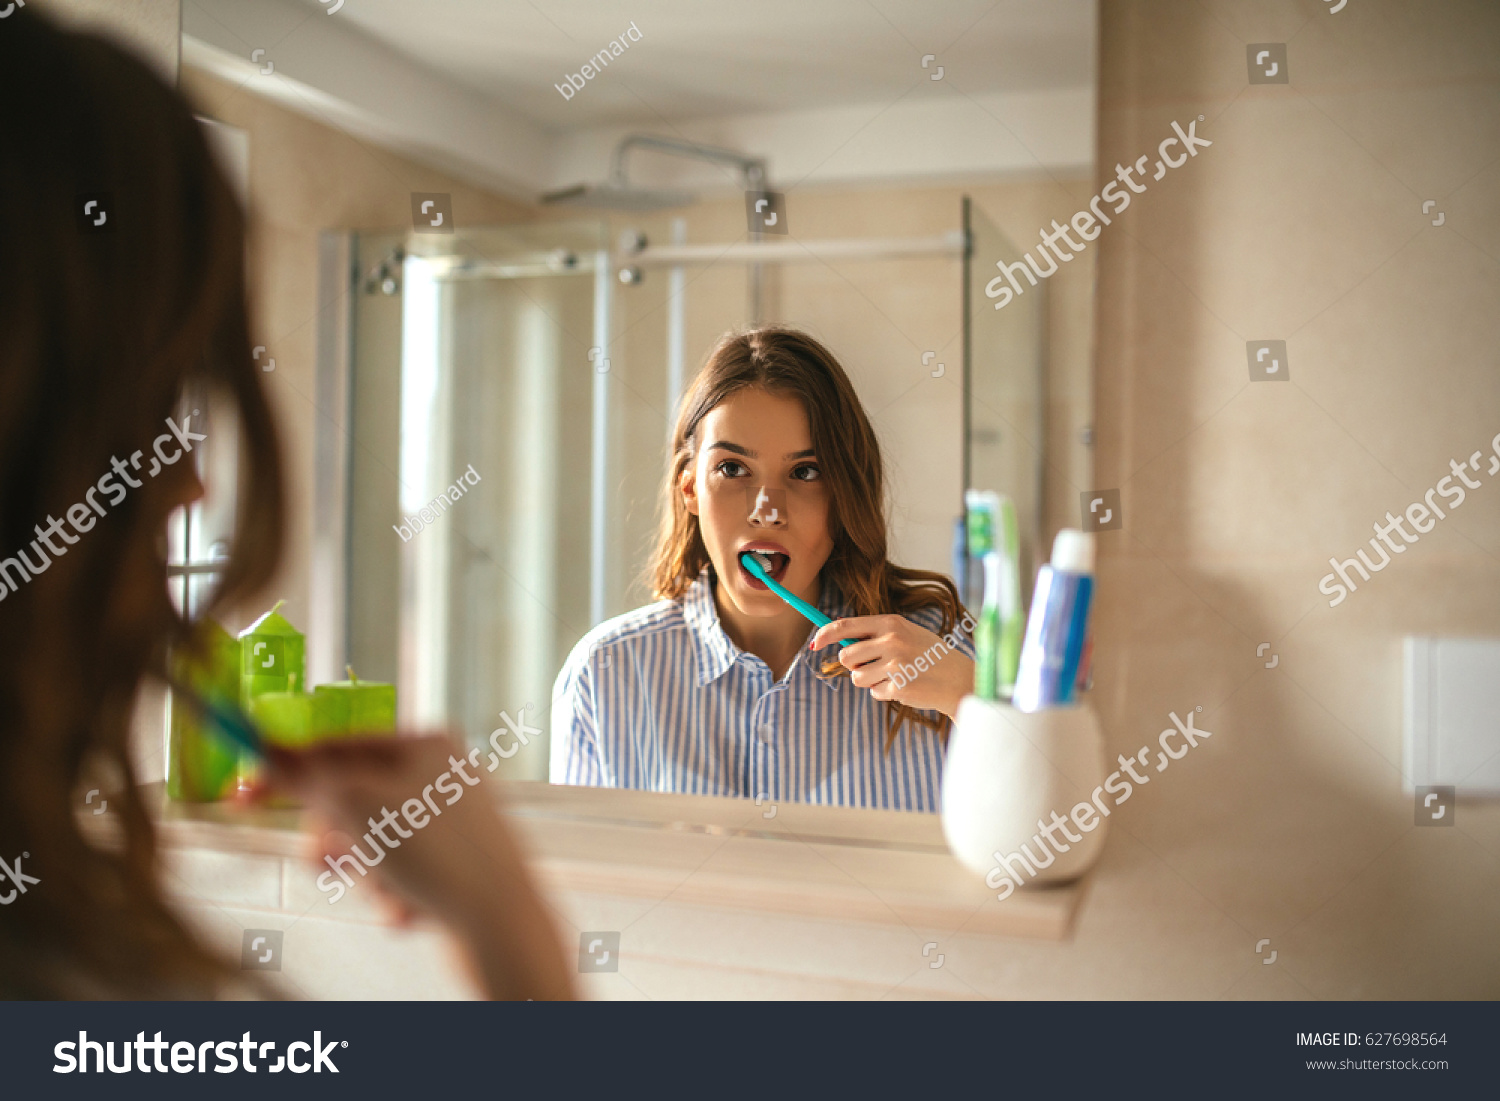 Portrait of a beautiful woman brushing teeth and looking in the mirror in the bathroom. #627698564